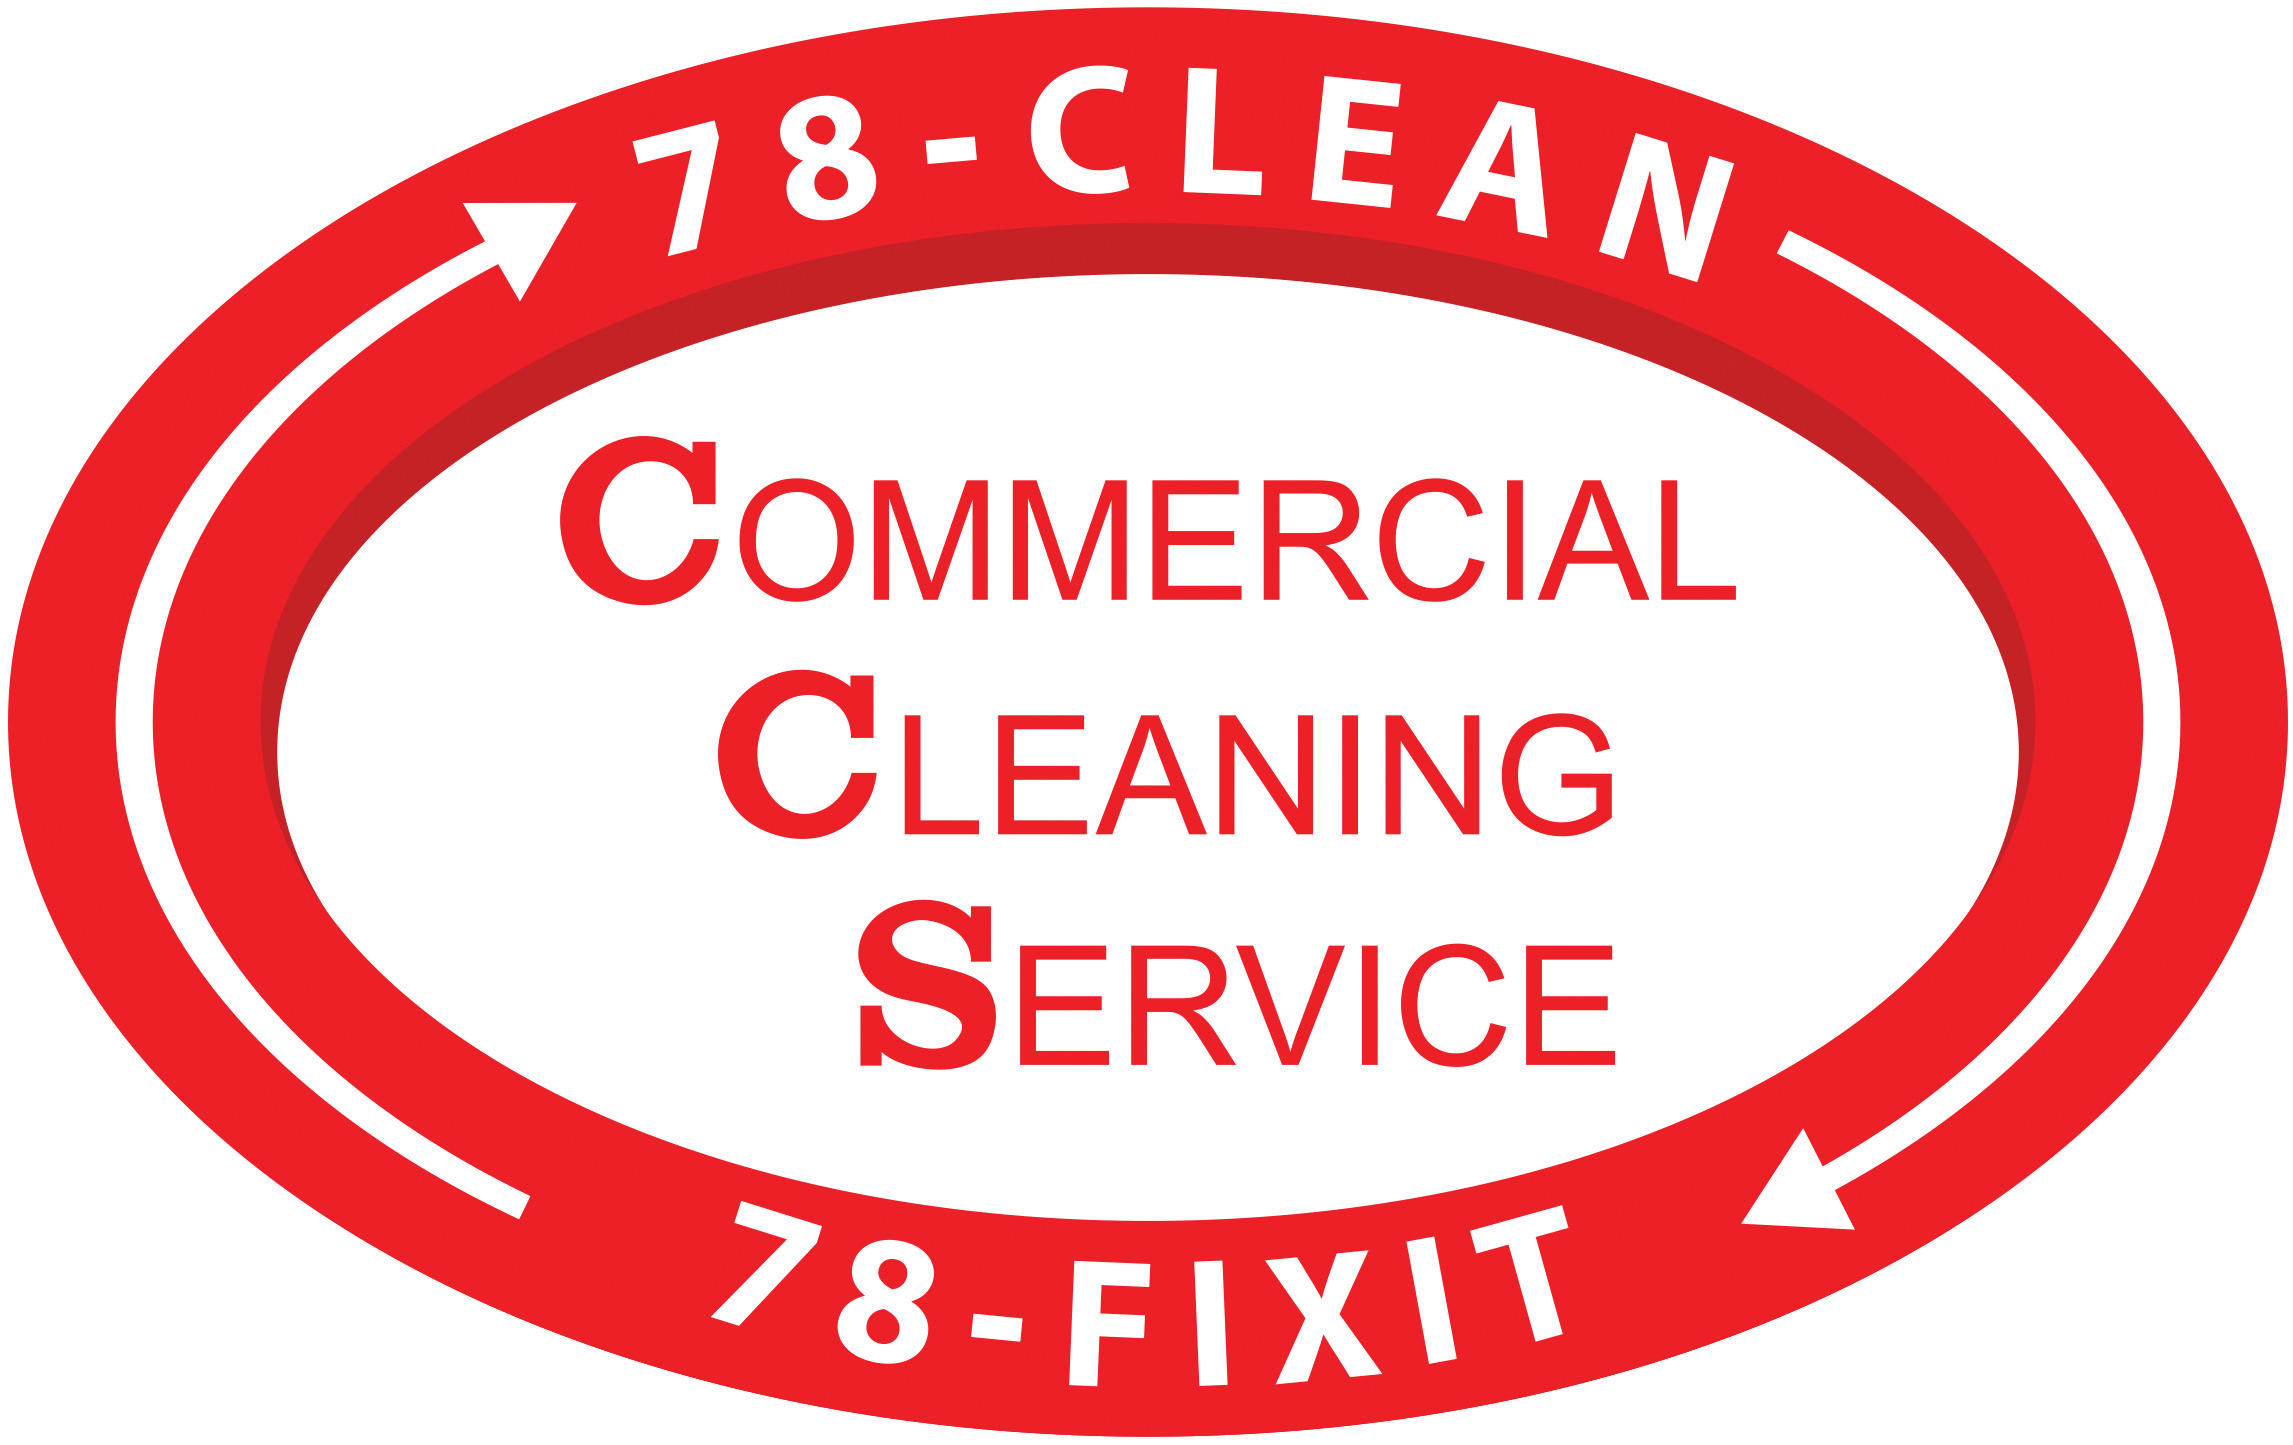 Commercial Cleaning Service (CCS)